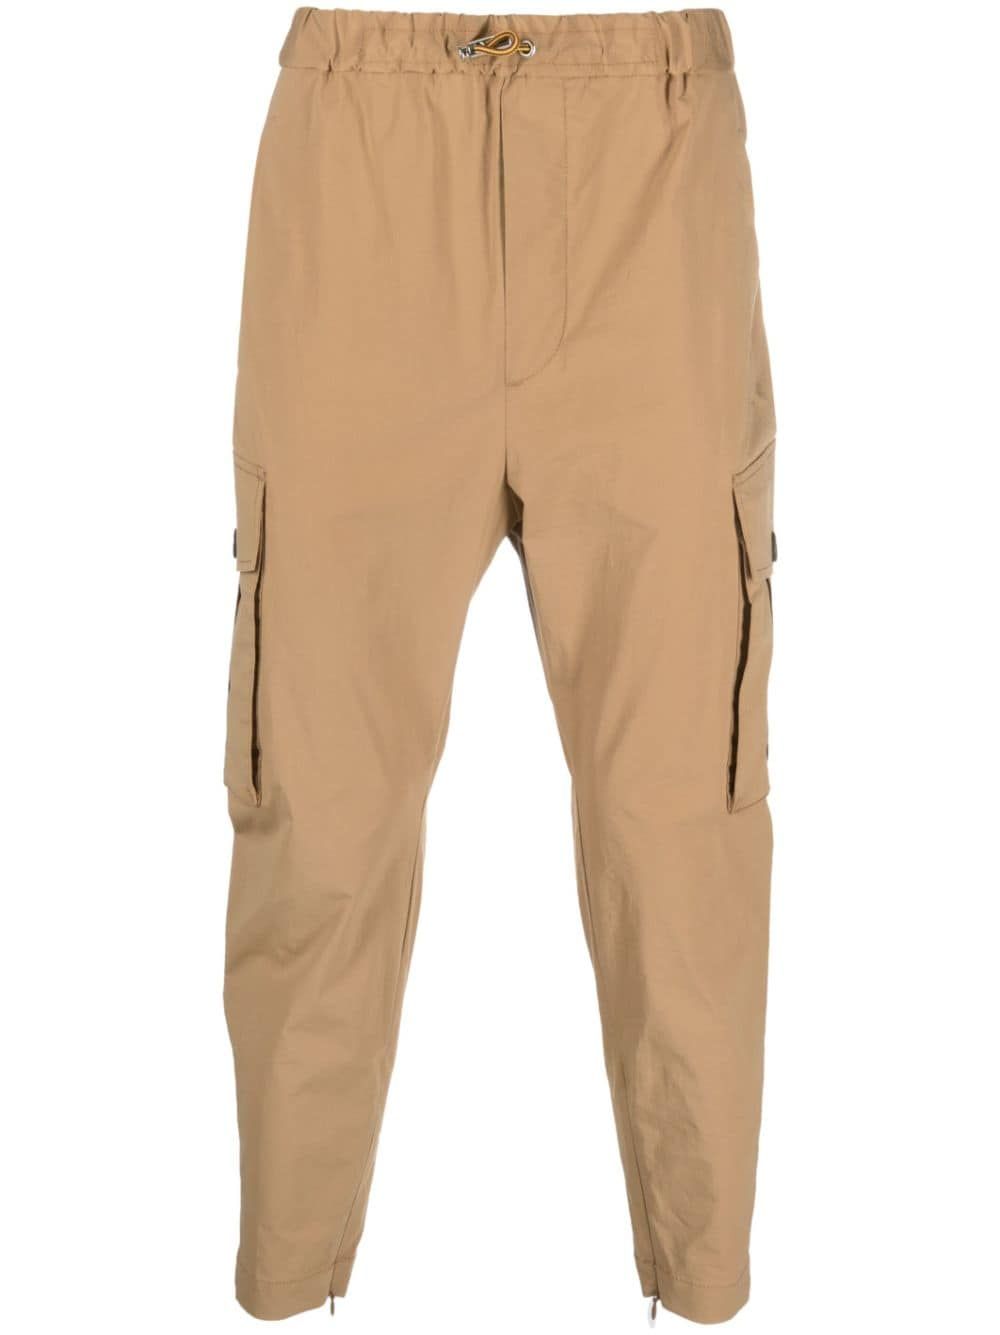 DSQUARED2 Camel Yellow Drawstring Tapered Trousers for Men